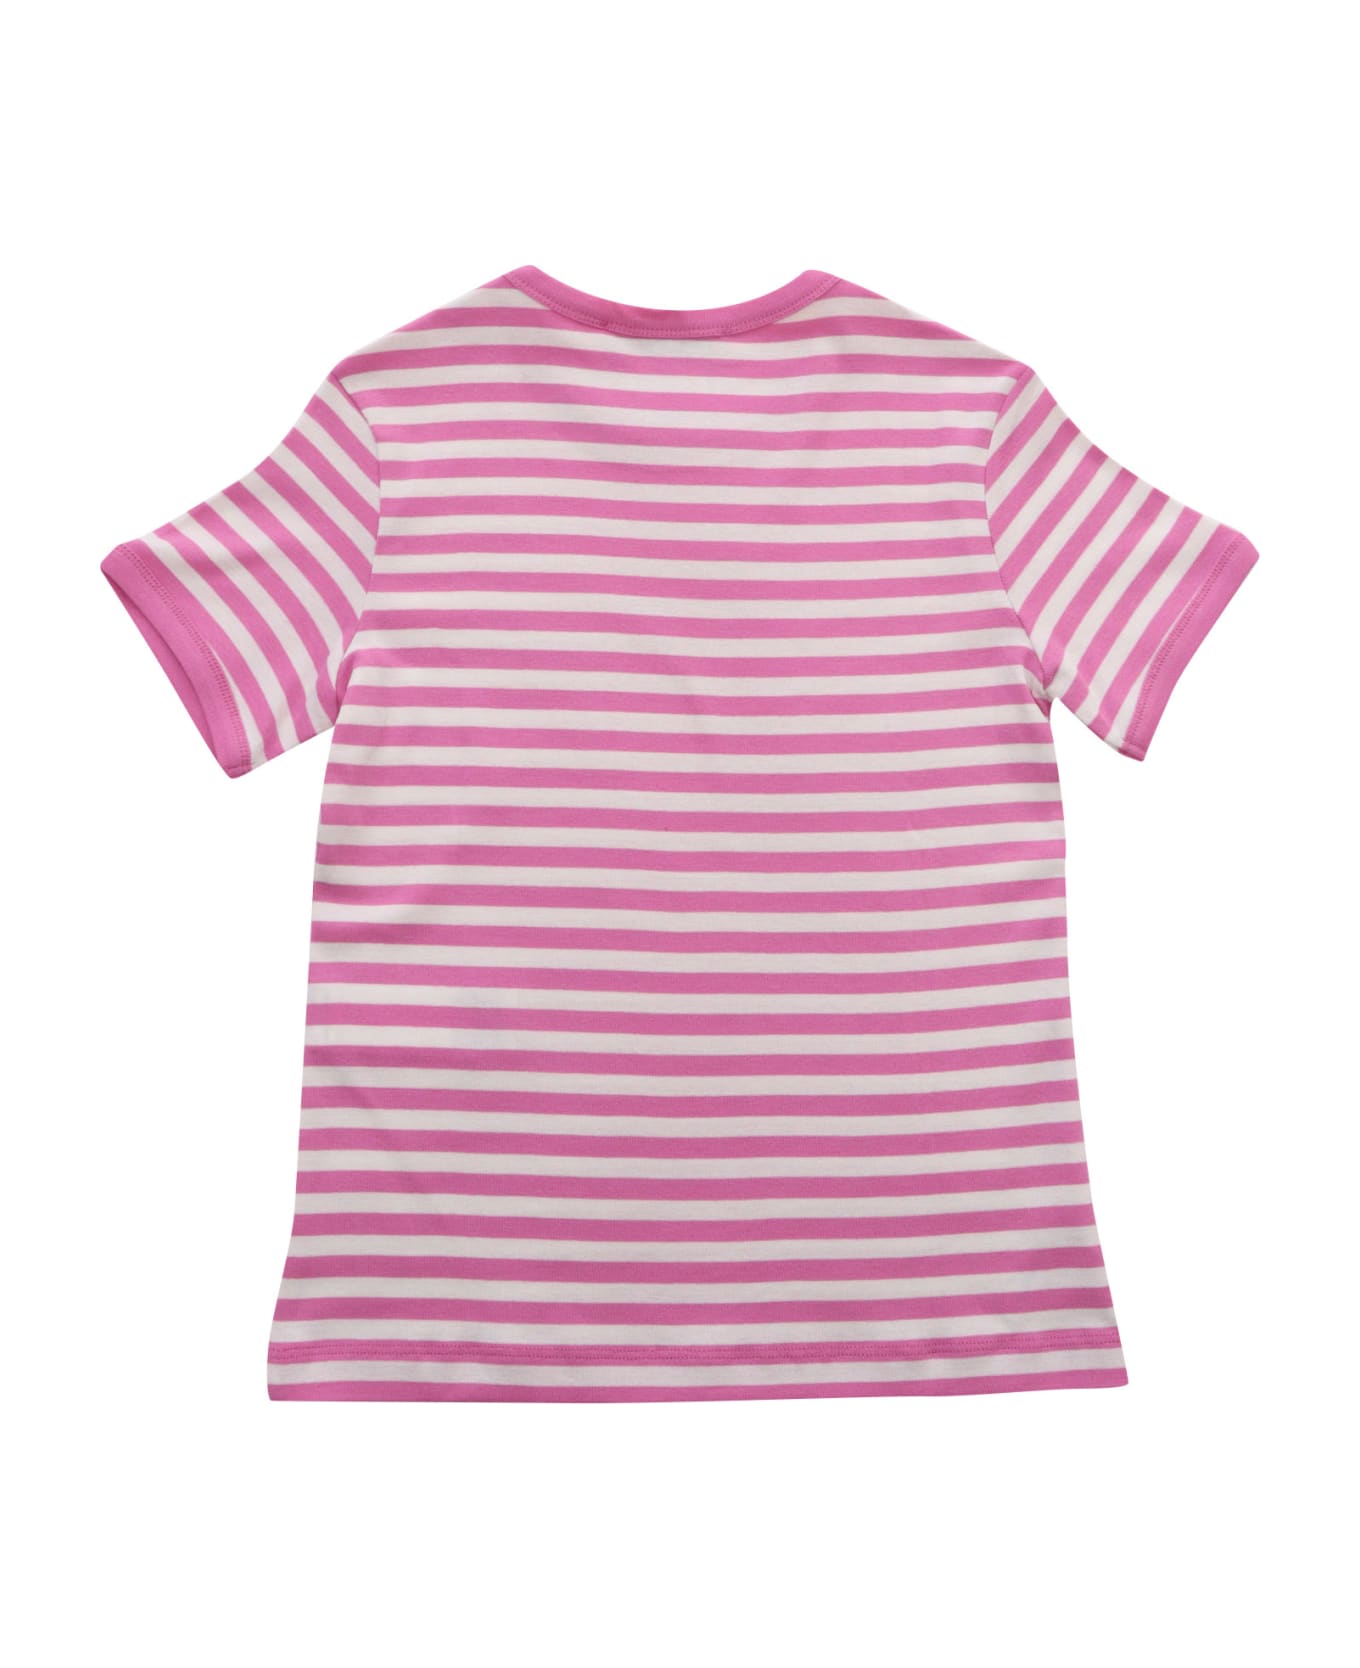 Max&Co. Pink Striped T-shirt - PINK